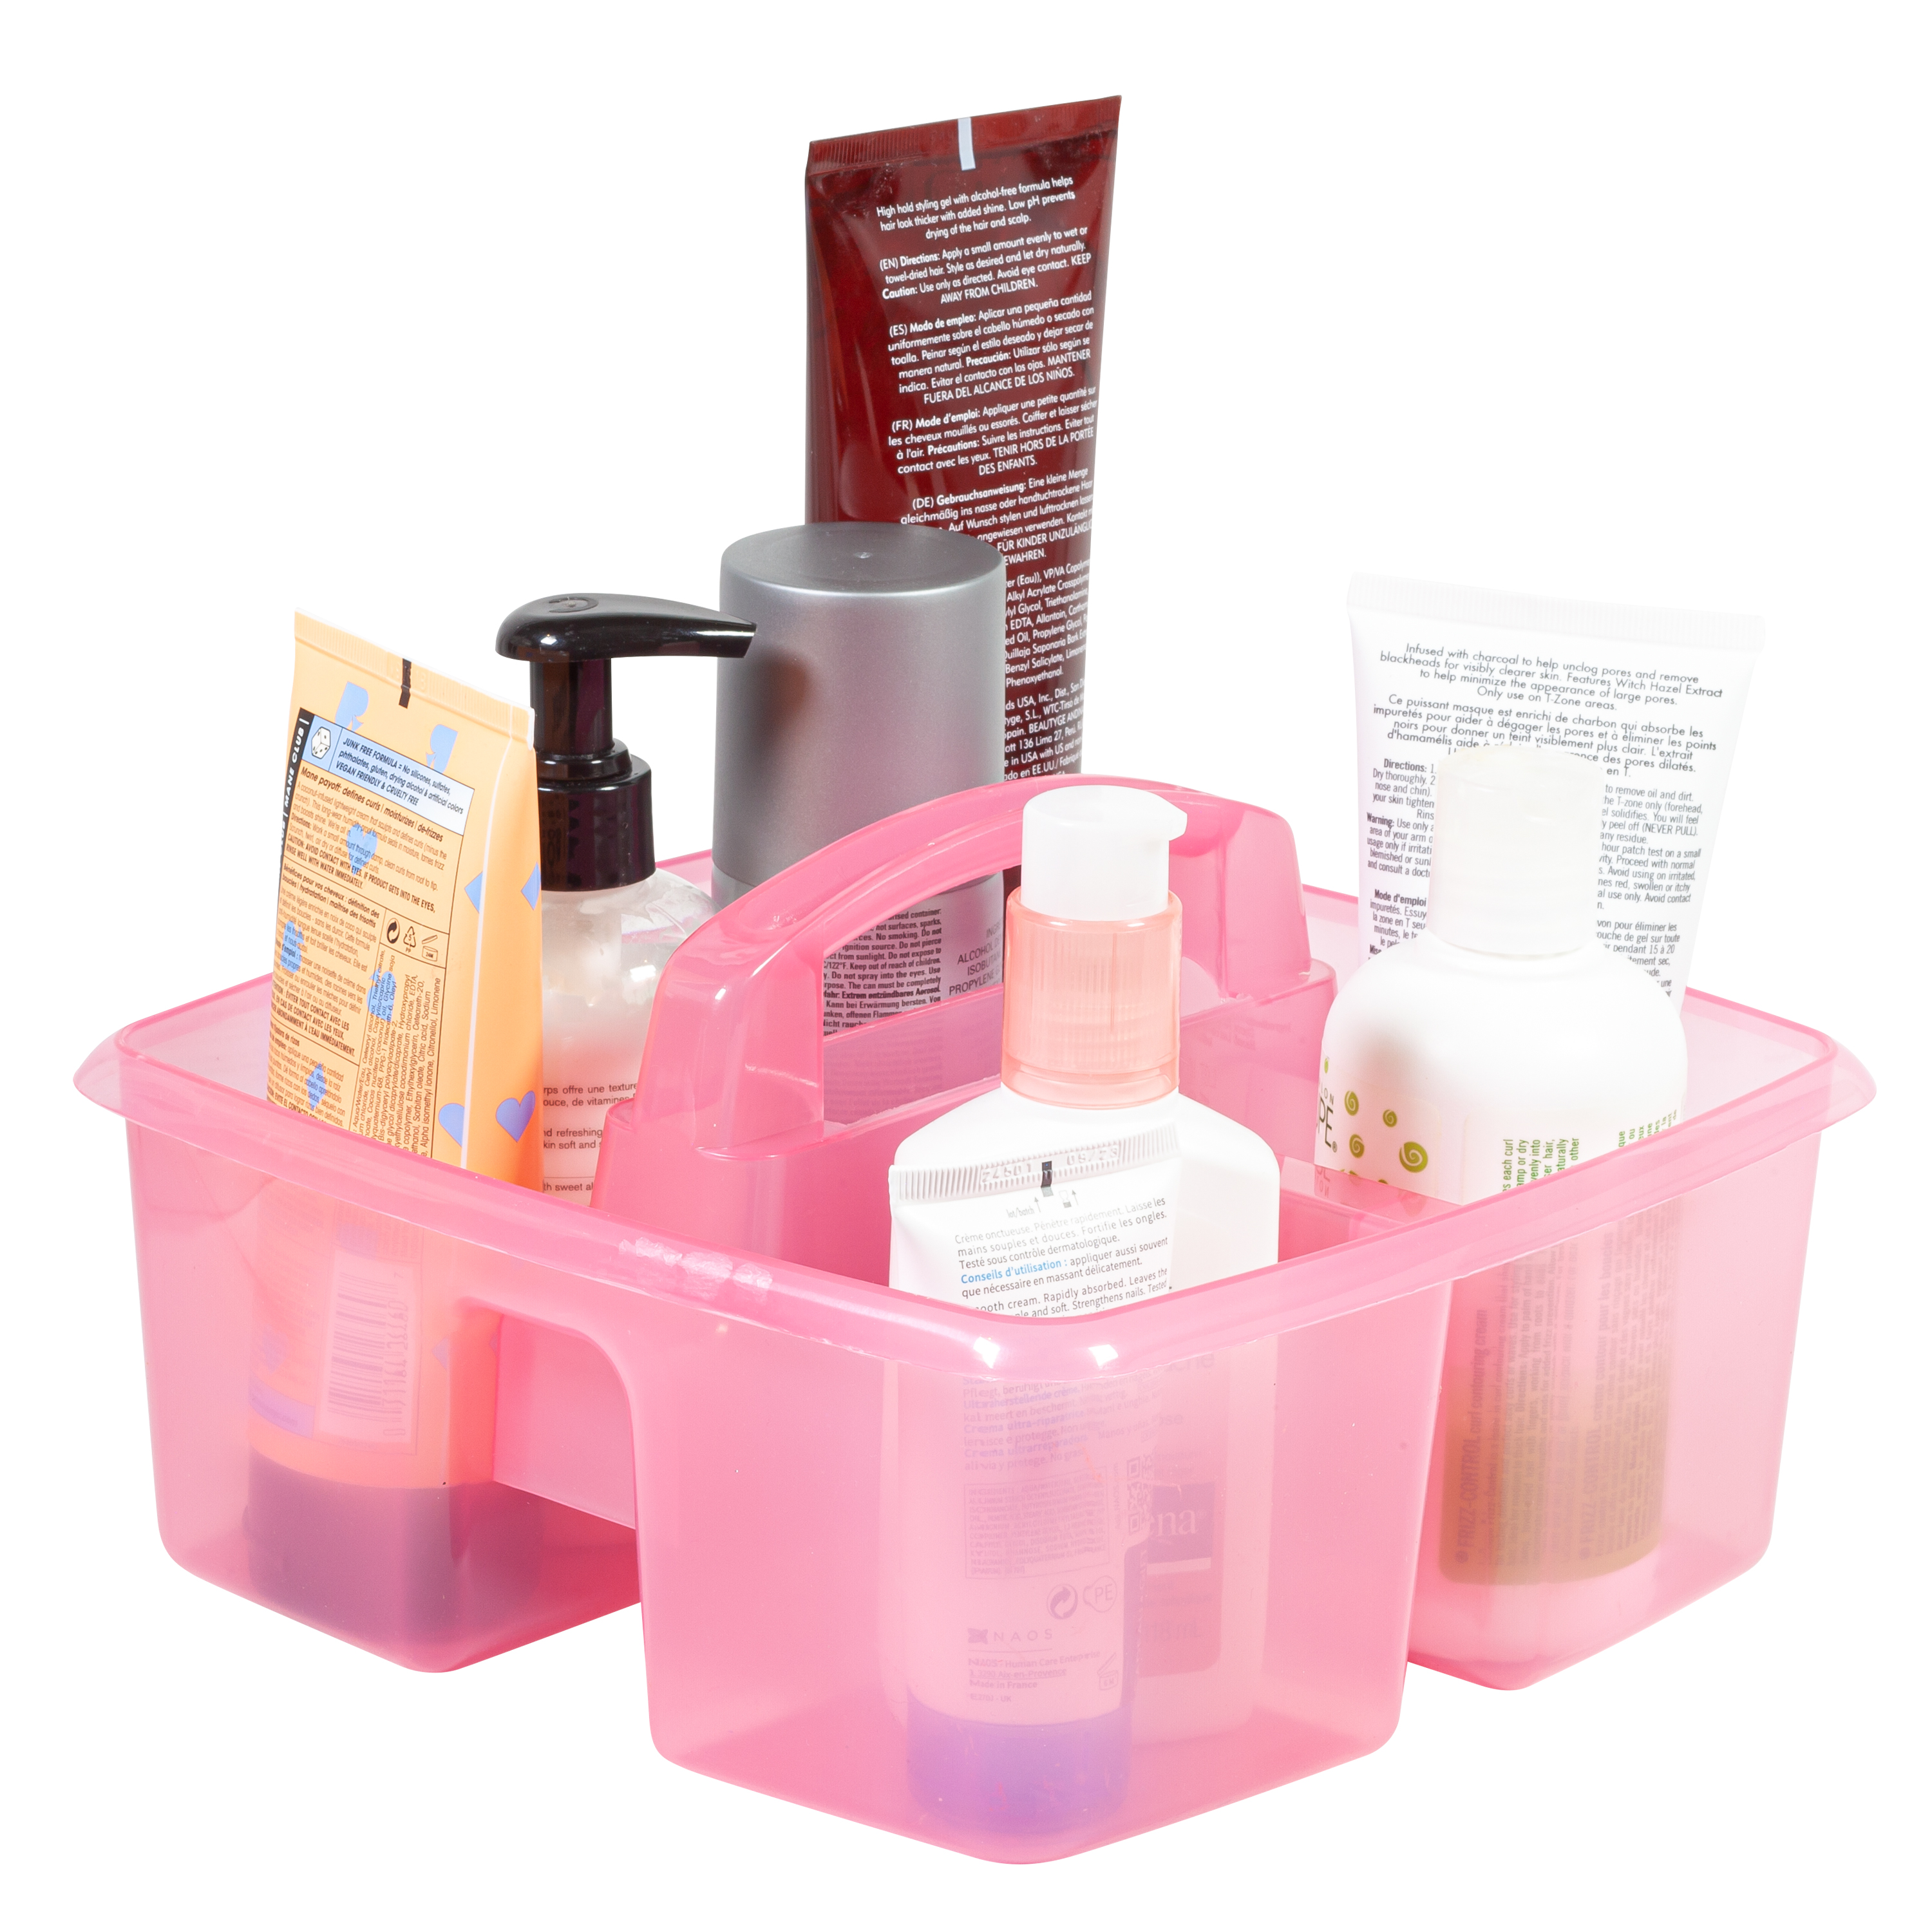 Pen+Gear Plastic Caddy, Craft and Hobby Organizer, Tint Pink 